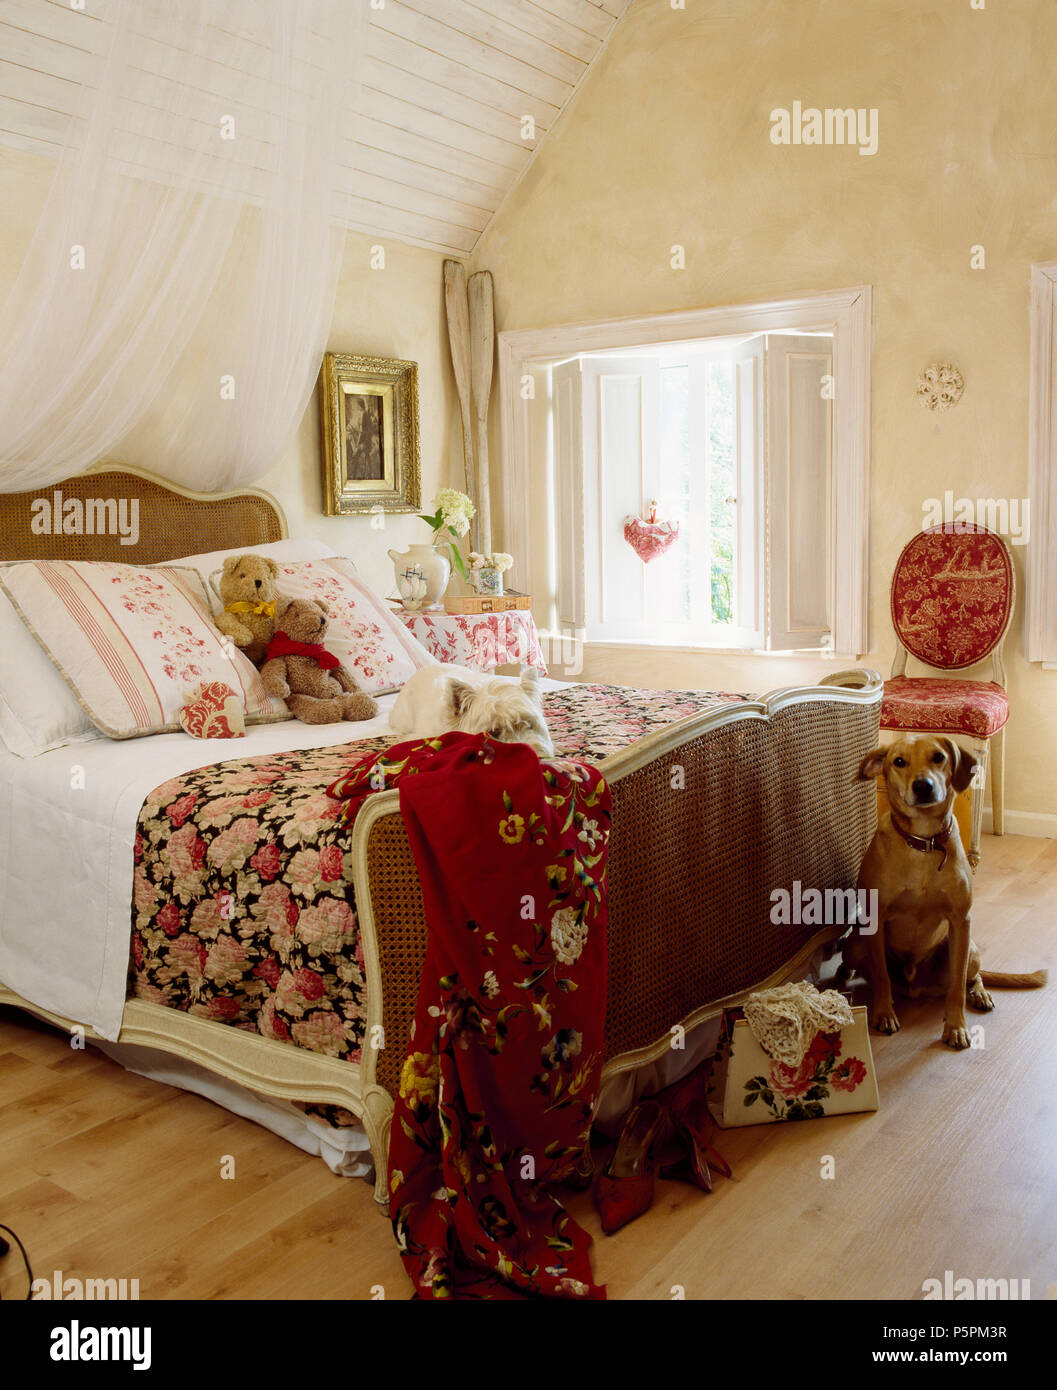 Dogs in country bedroom with white voile mosquito net above antique Bergere bed with rose patterned quilt Stock Photo